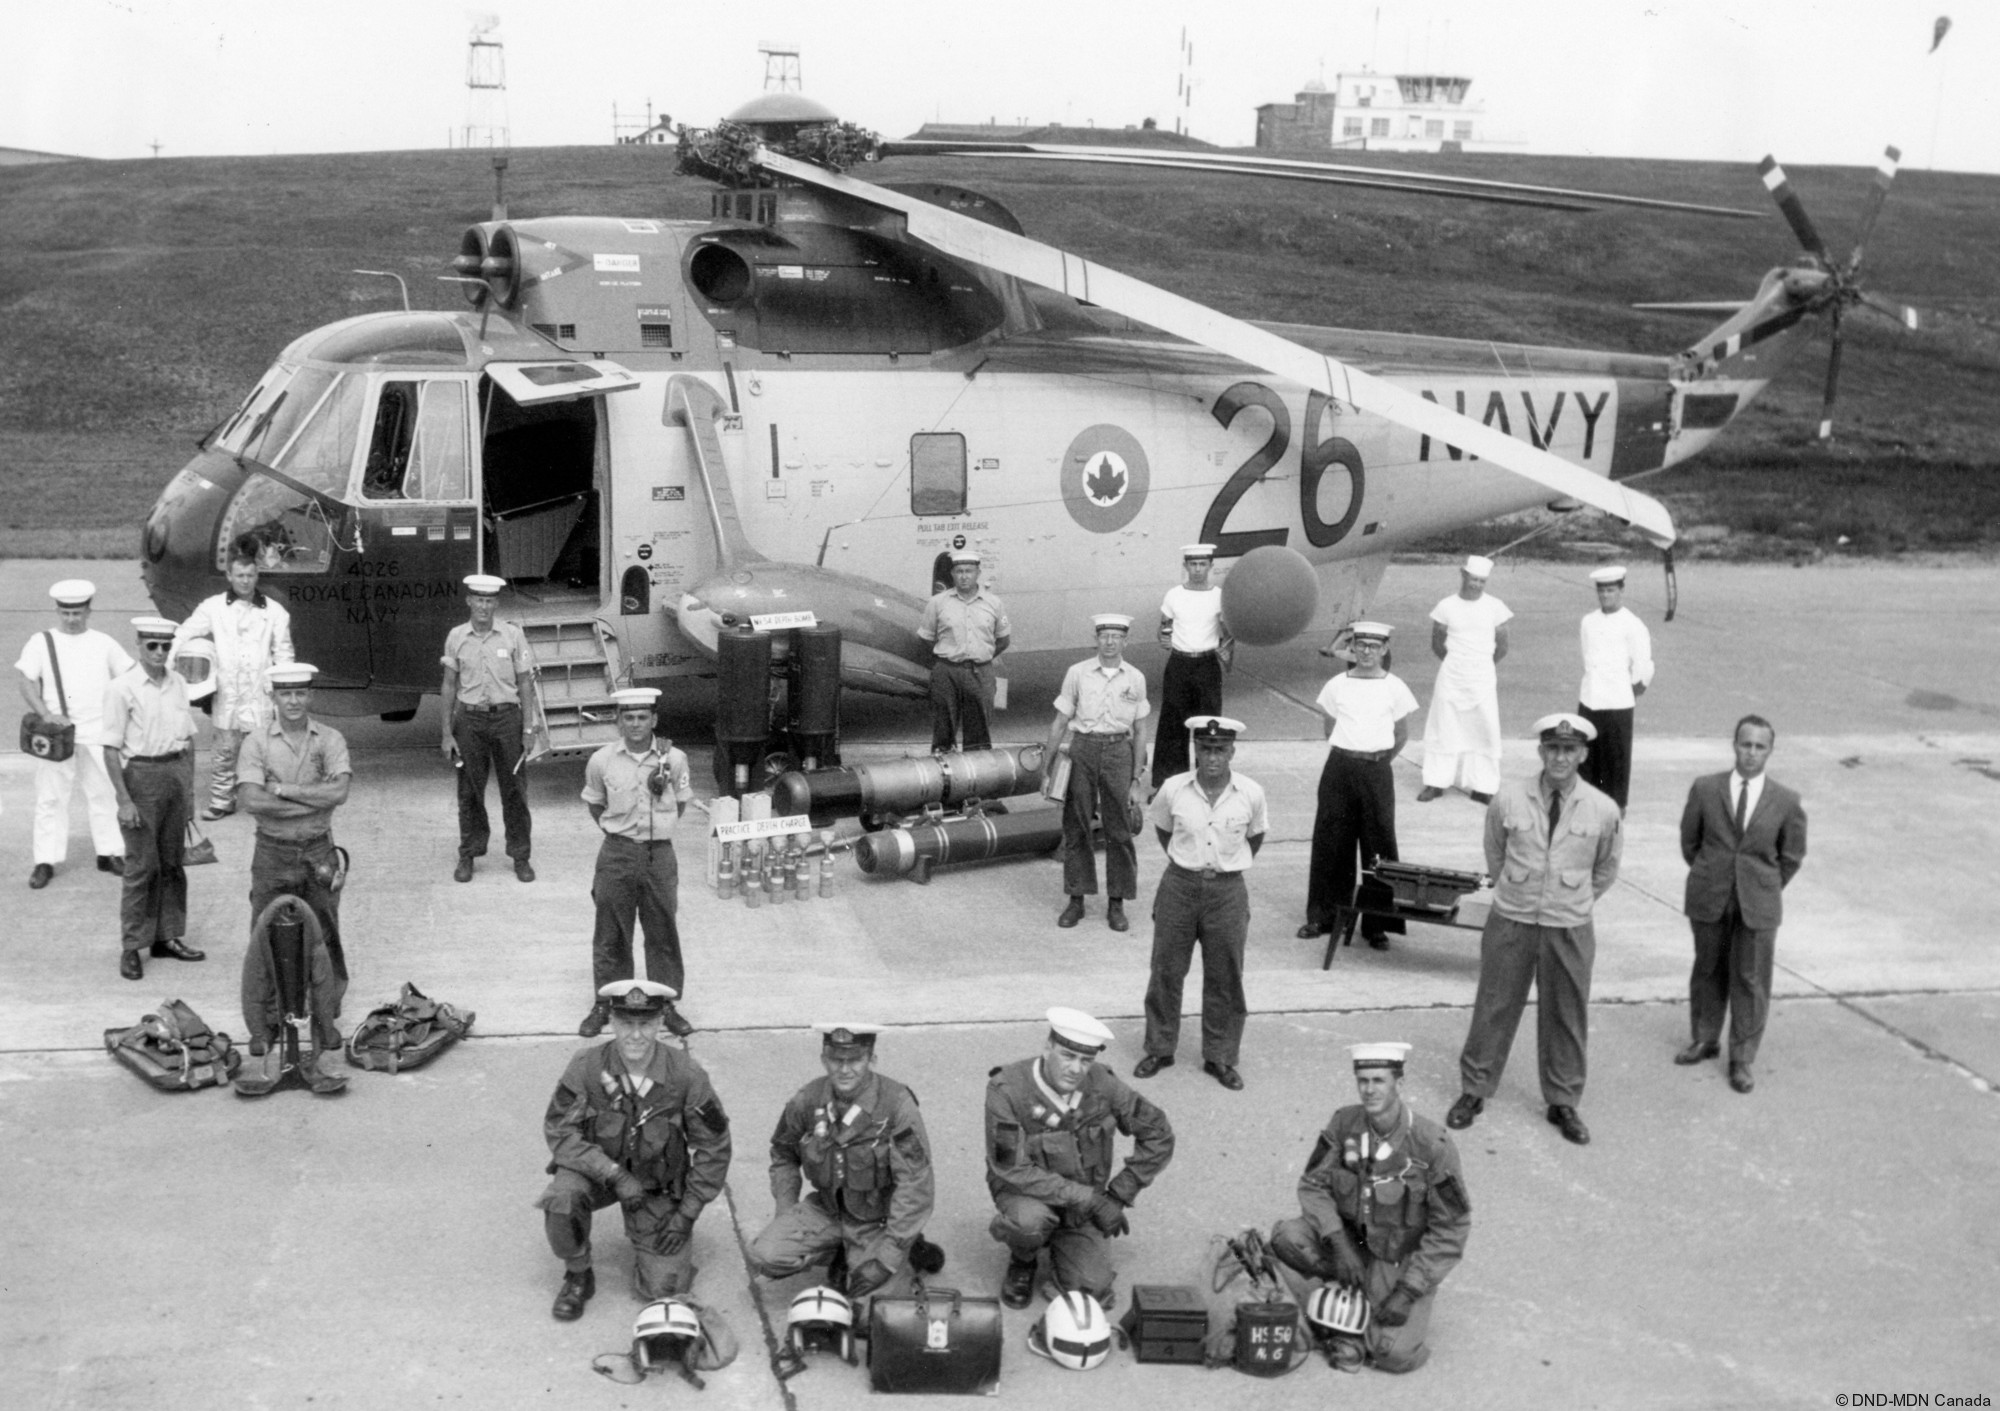 ch-124 sea king royal canadian navy sikorsky naval helicopter rcaf hmcs squadron 58